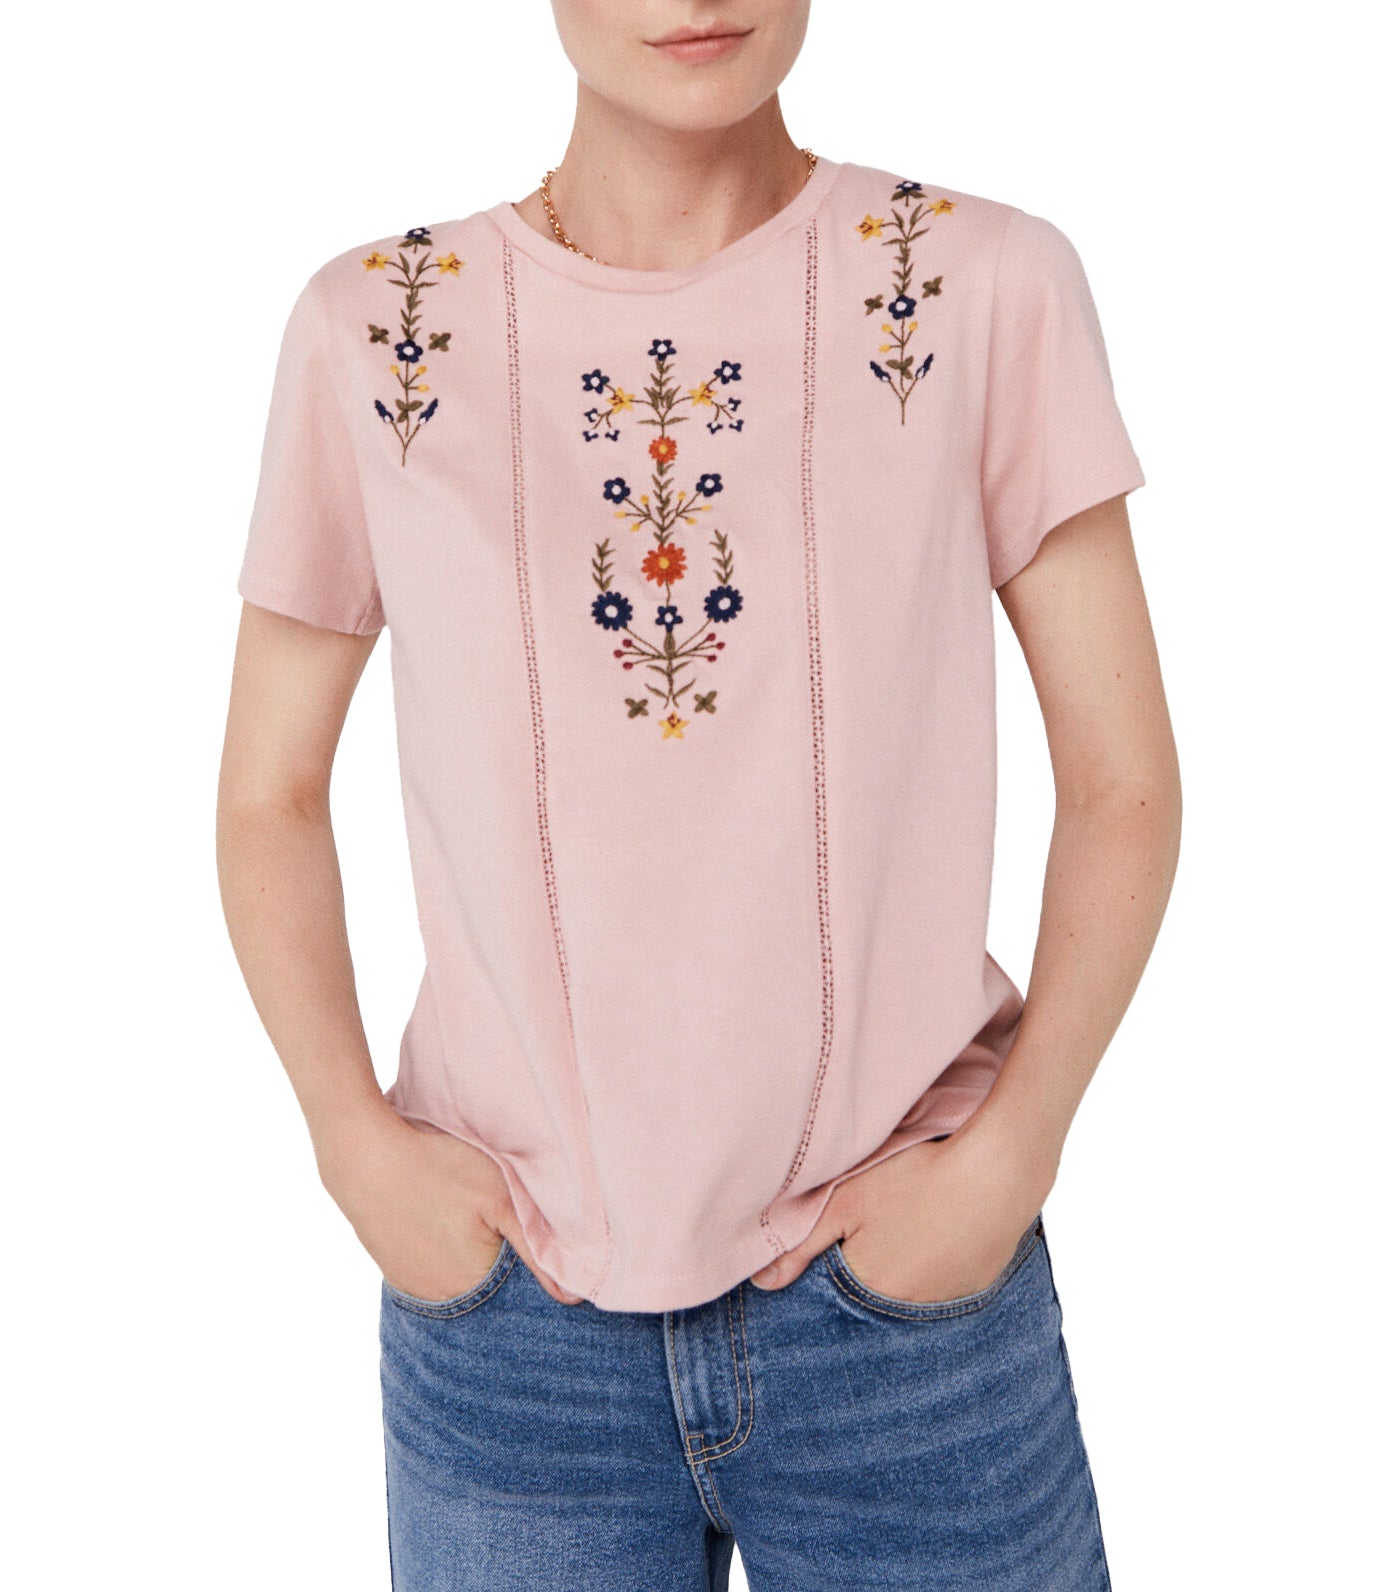 Floral Embroidery T-Shirt Pink